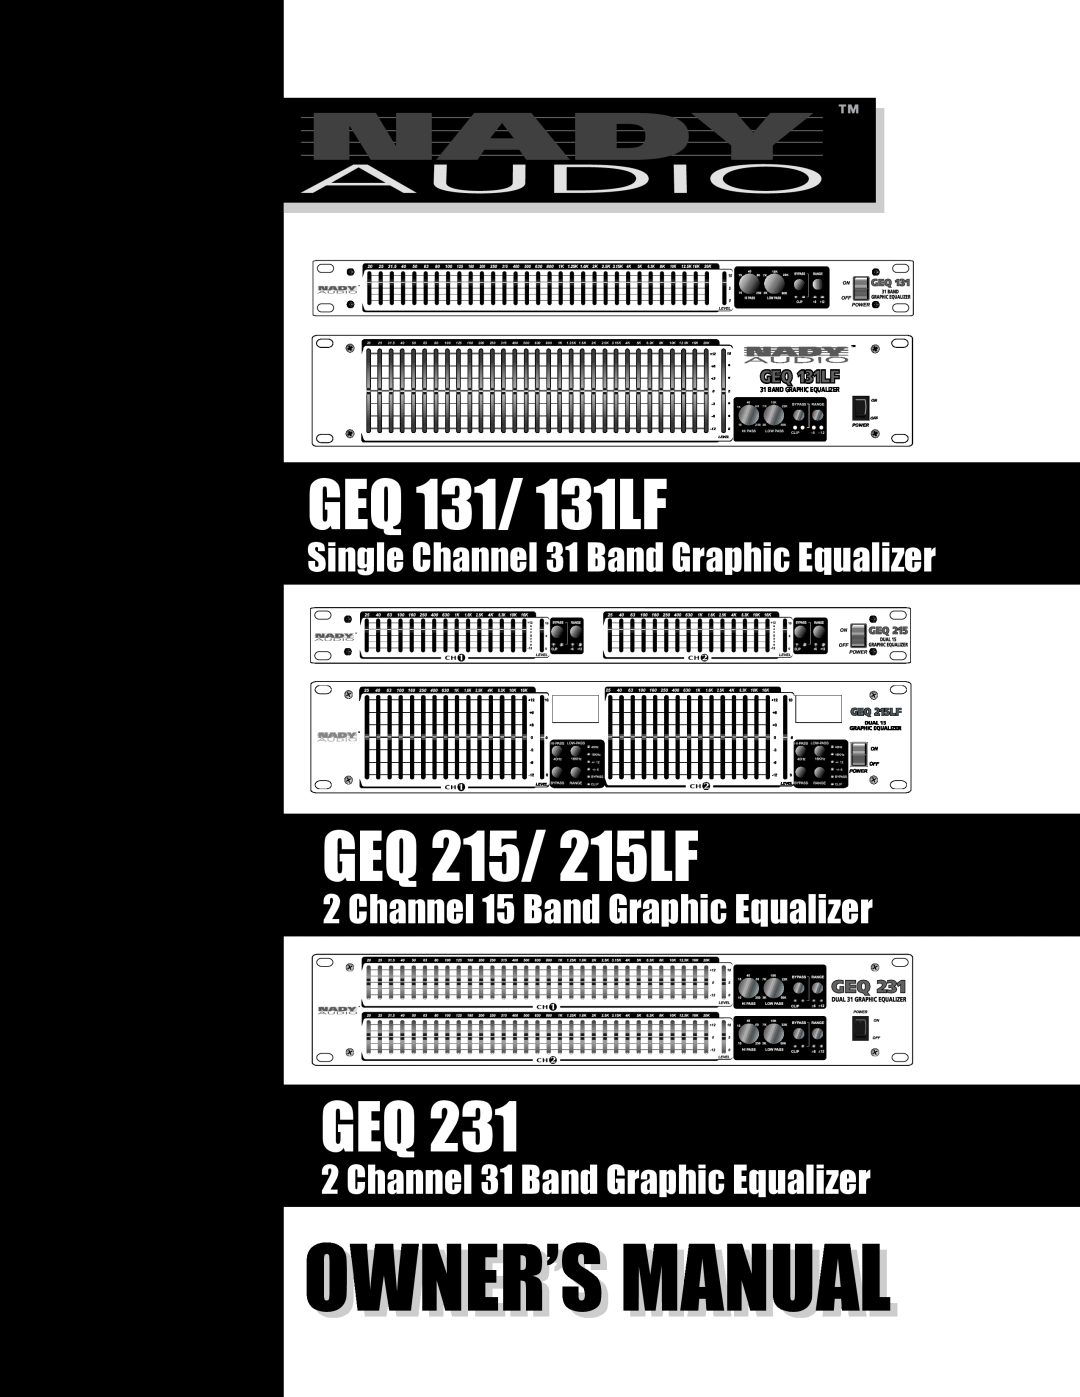 Nady Systems GEQ 215 owner manual Equalizers, O W N E R ’ S M A N U A L, Graphic Equalizer 